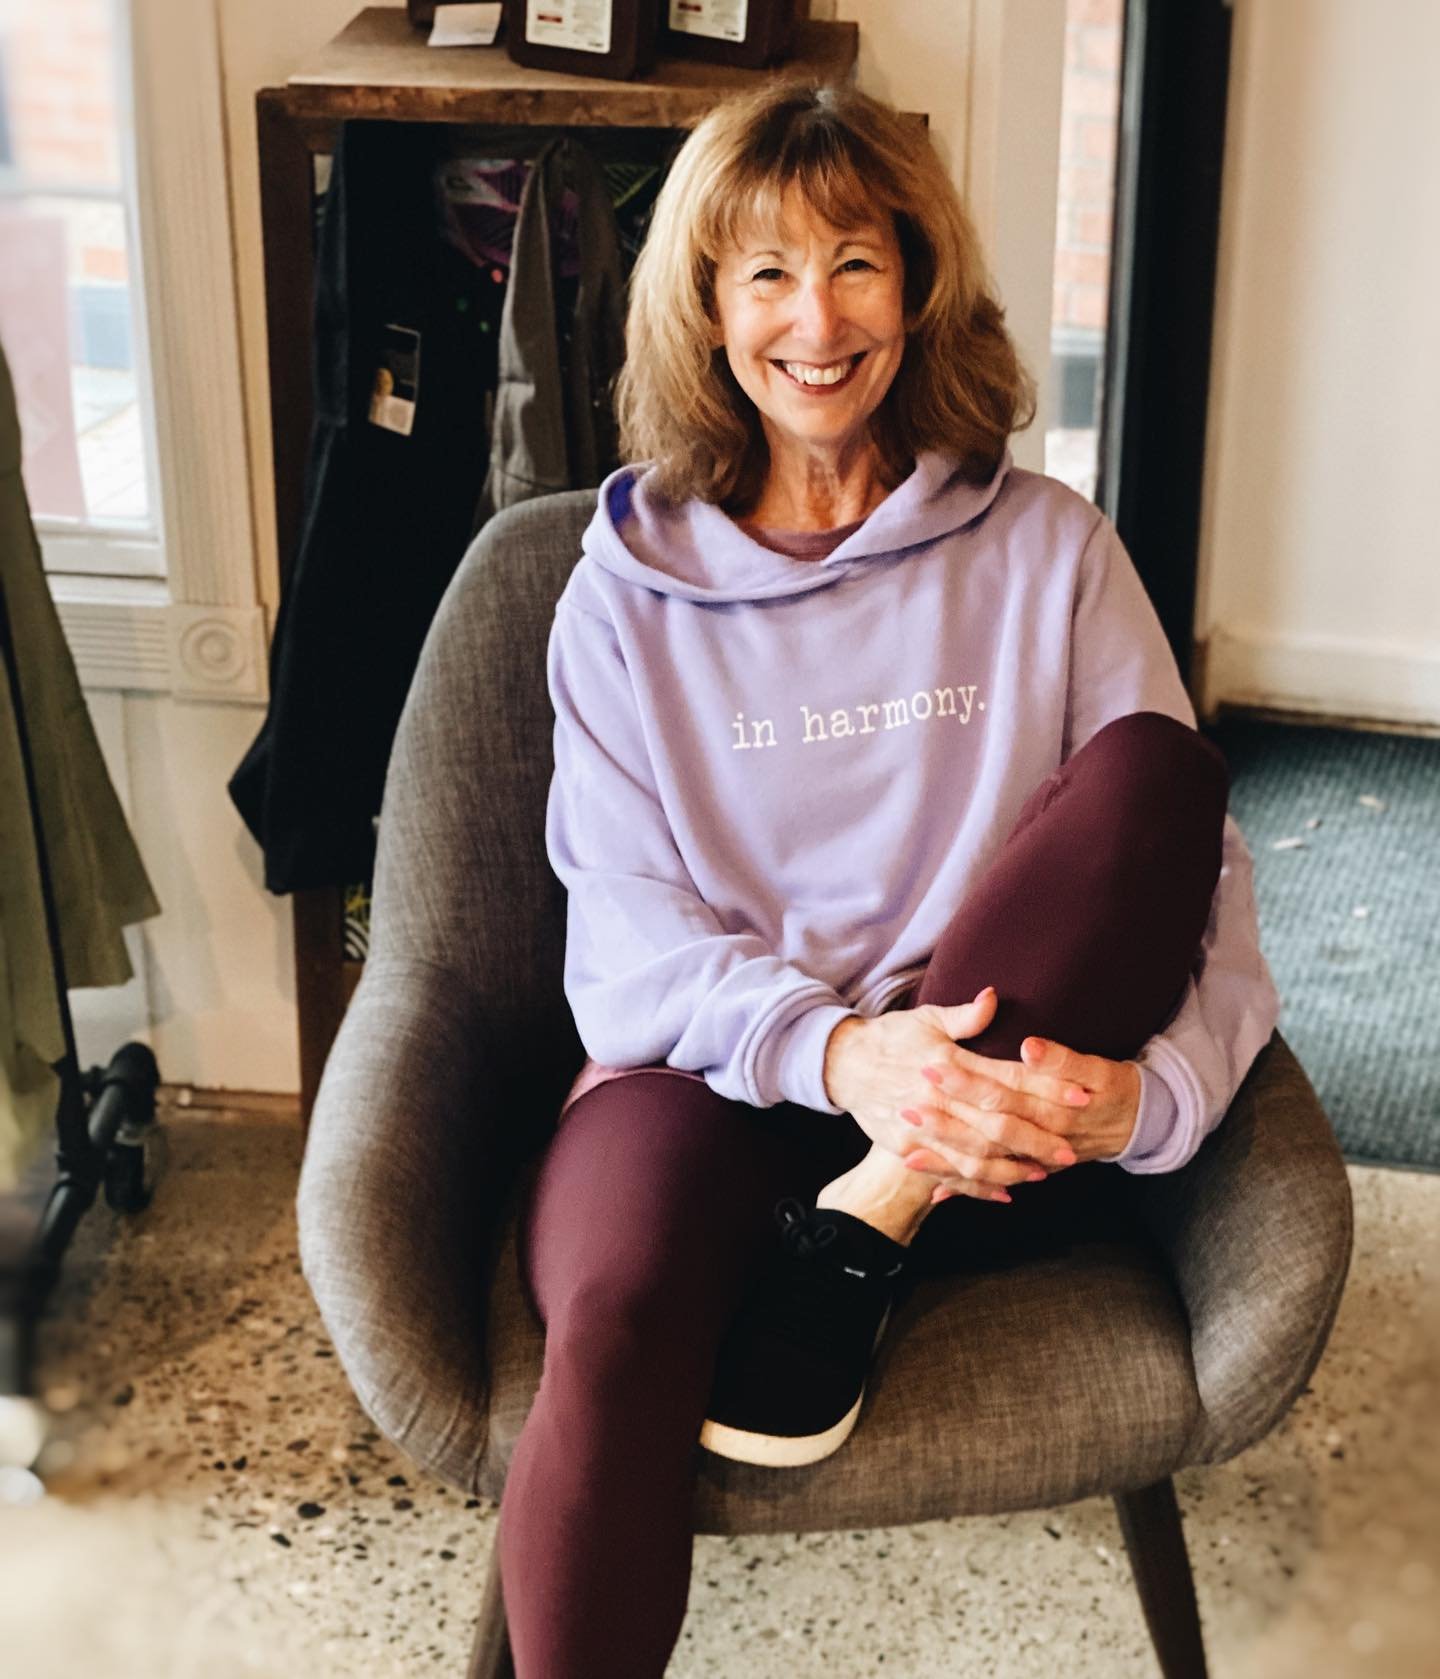 We love our people!
And we love our boutique!
Put them together and it&rsquo;s whole lotta greatness!

Come and grab a sweatshirt for the chilly days and a tank for the warm ones. #michiganspring
&bull;
&bull;
&bull;
&bull;
#inharmonyogastudio #inhar